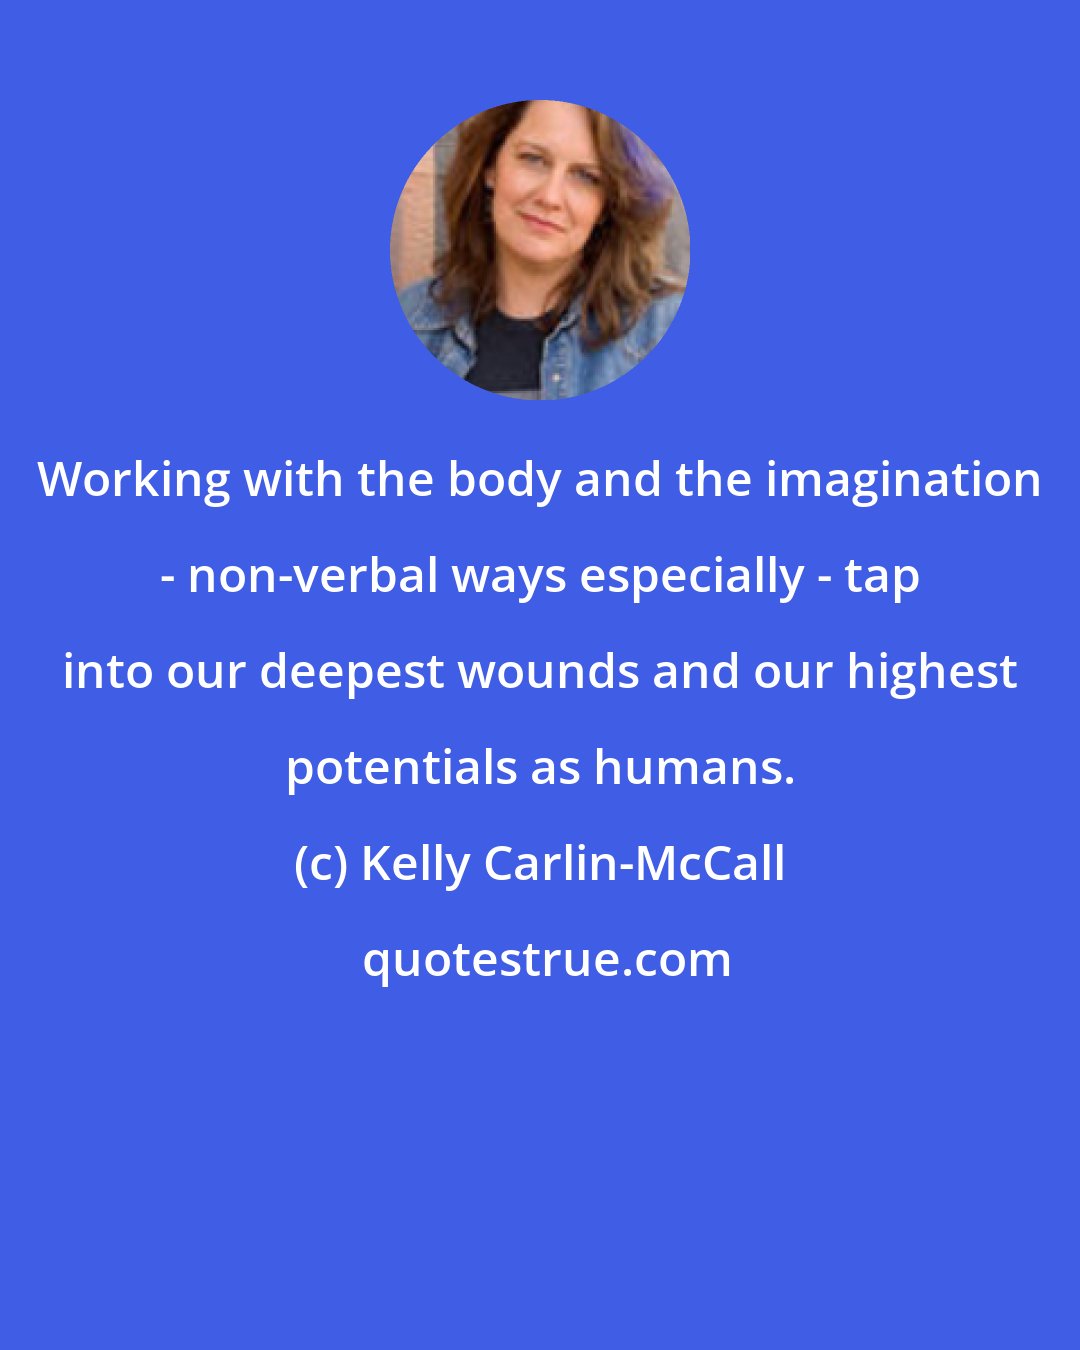 Kelly Carlin-McCall: Working with the body and the imagination - non-verbal ways especially - tap into our deepest wounds and our highest potentials as humans.